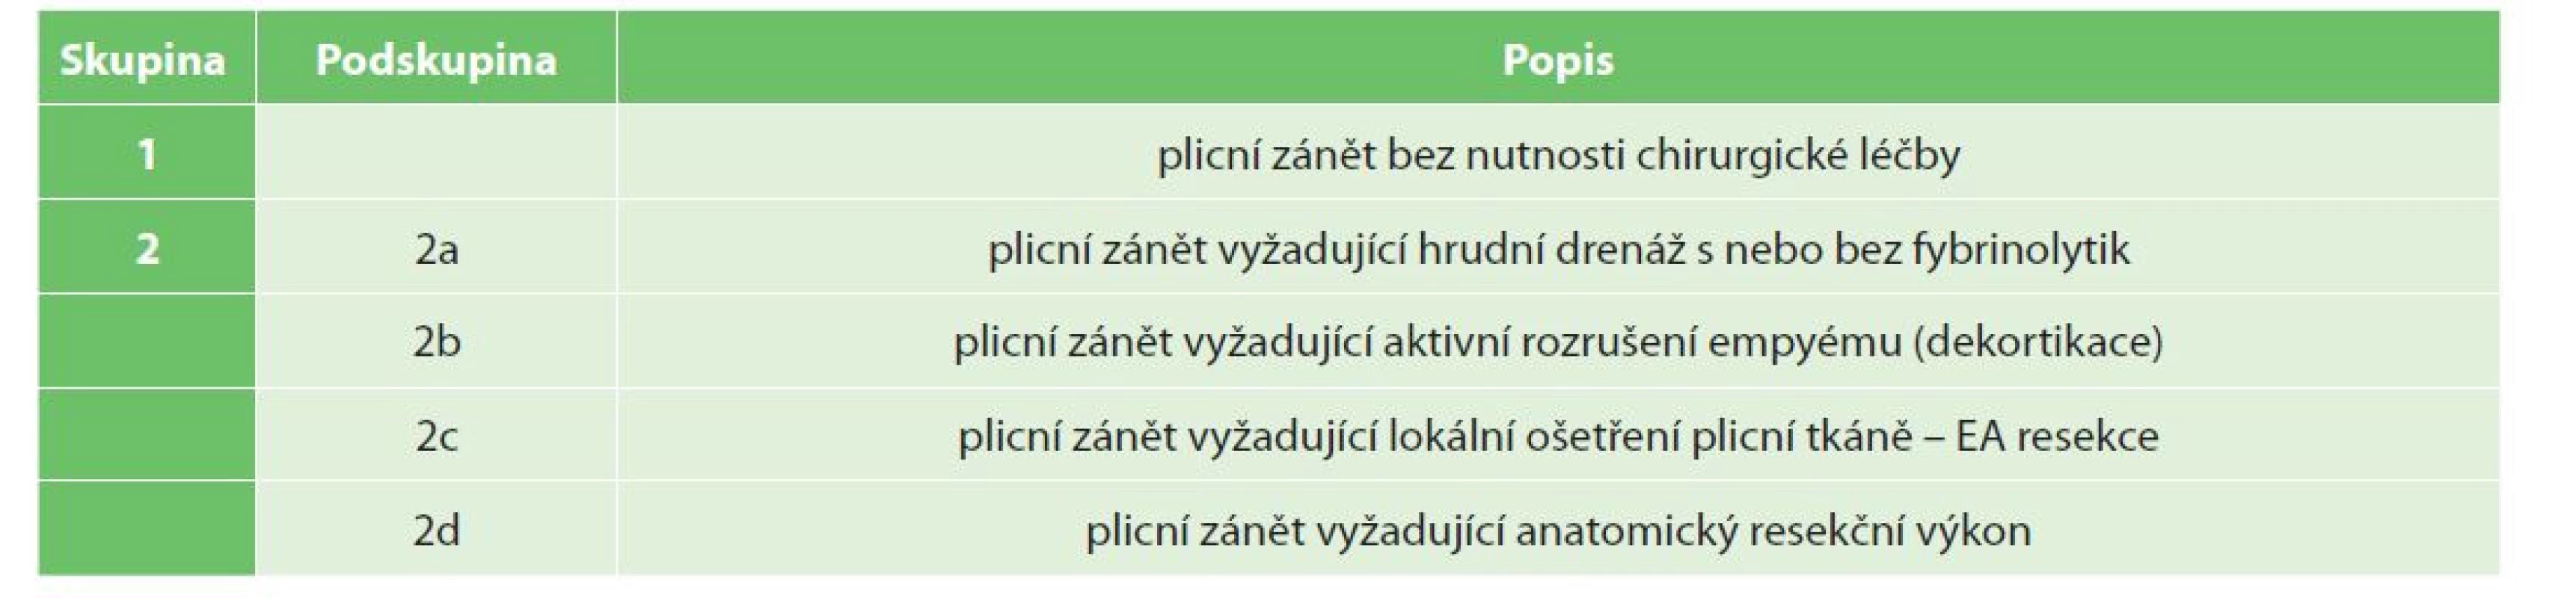 Metodika rozdělení pacientů do skupin a podskupin dle potřebné léčby<br>
Tab. 1: Patient groups and subgroups according to the required treatment